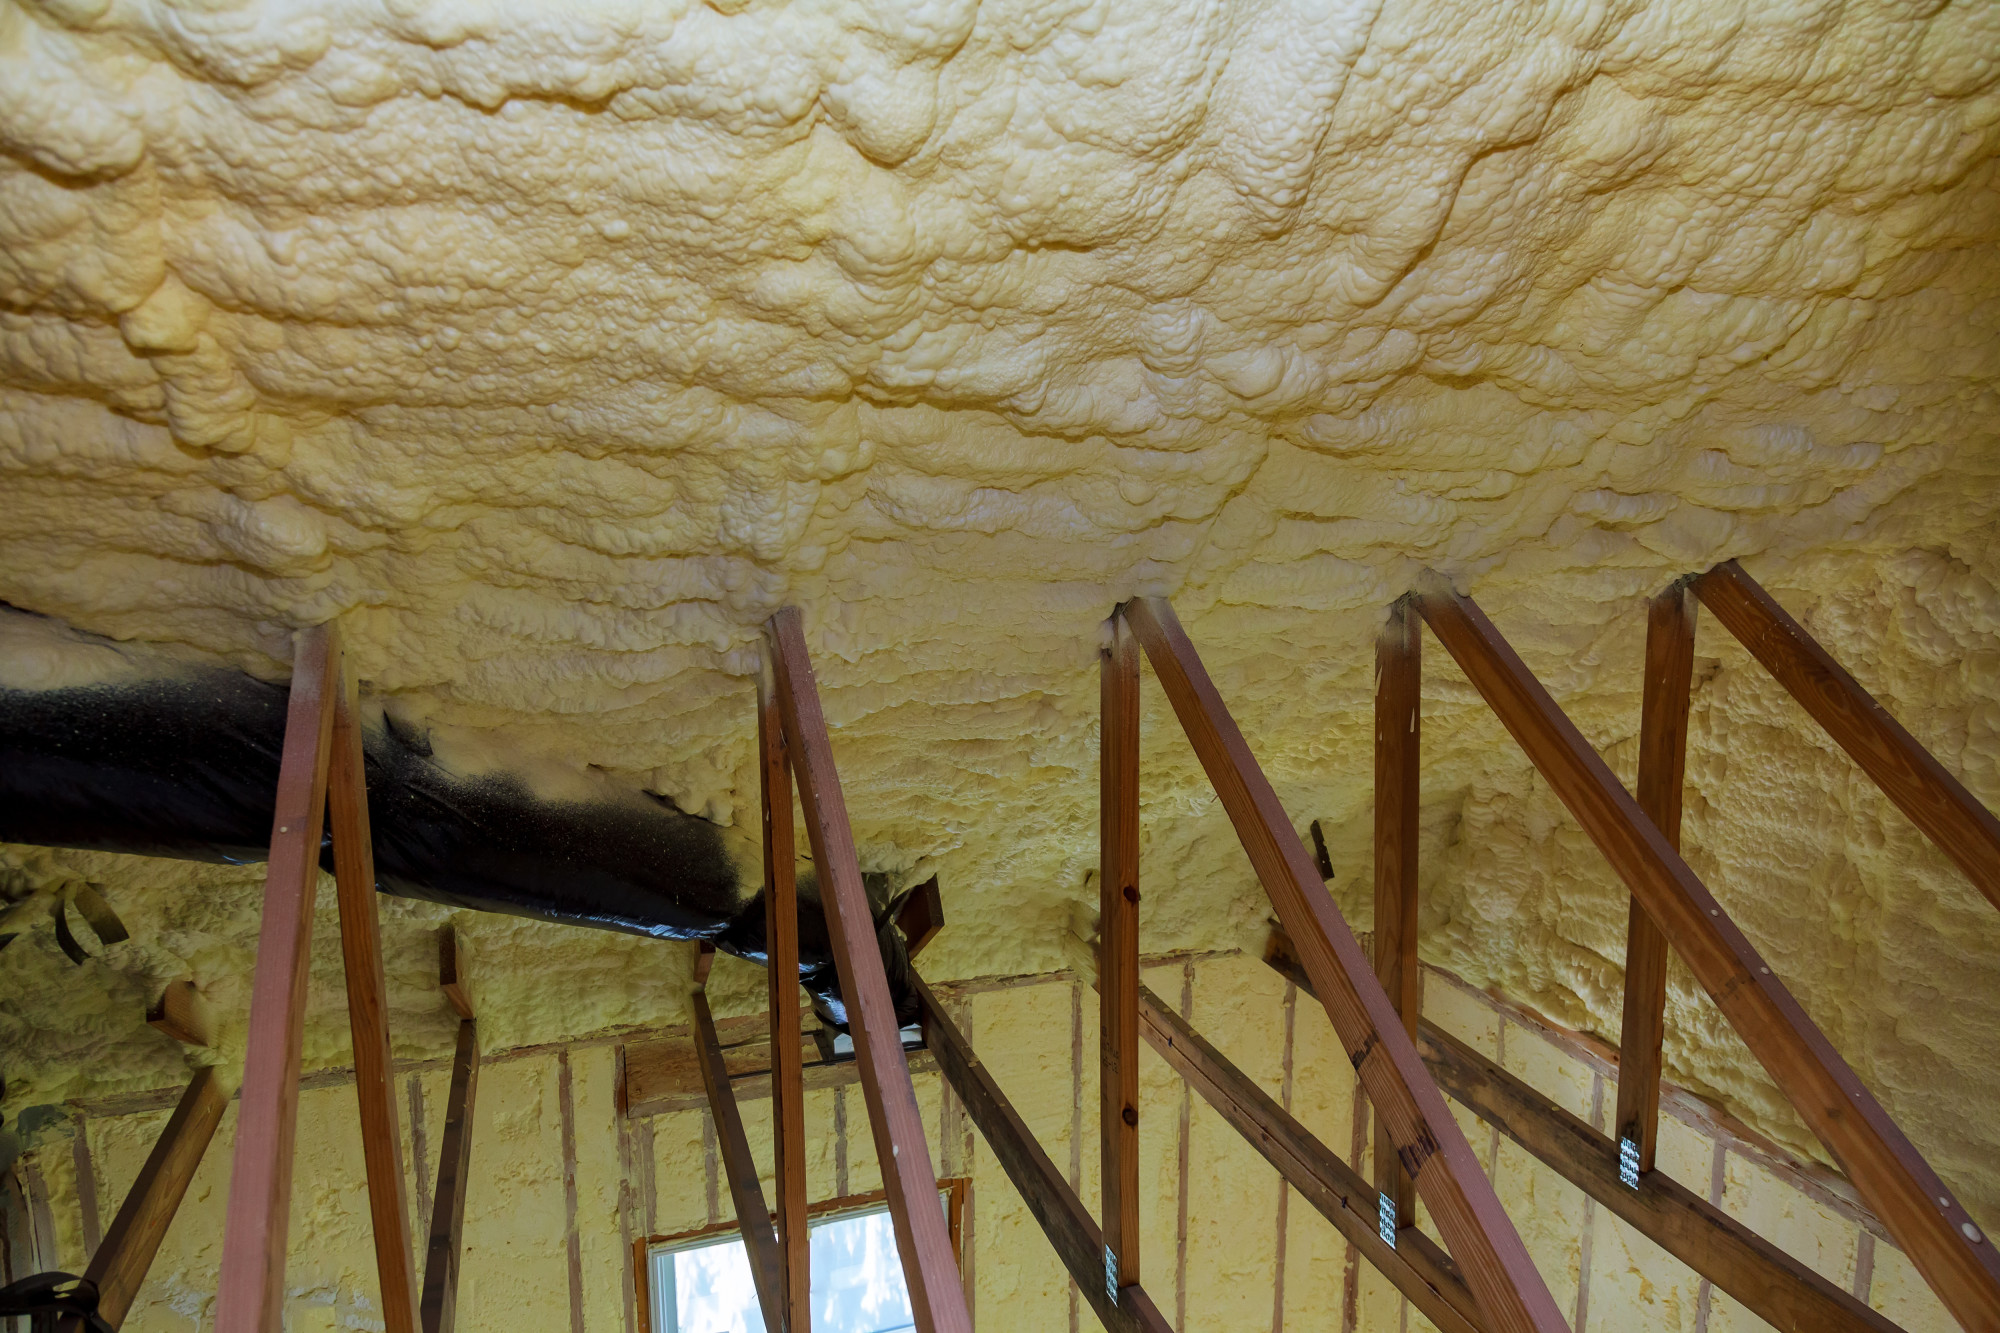 When it comes to loft insulation, you should know the prices you can expect to pay. Luckily, this quick guide has you covered.